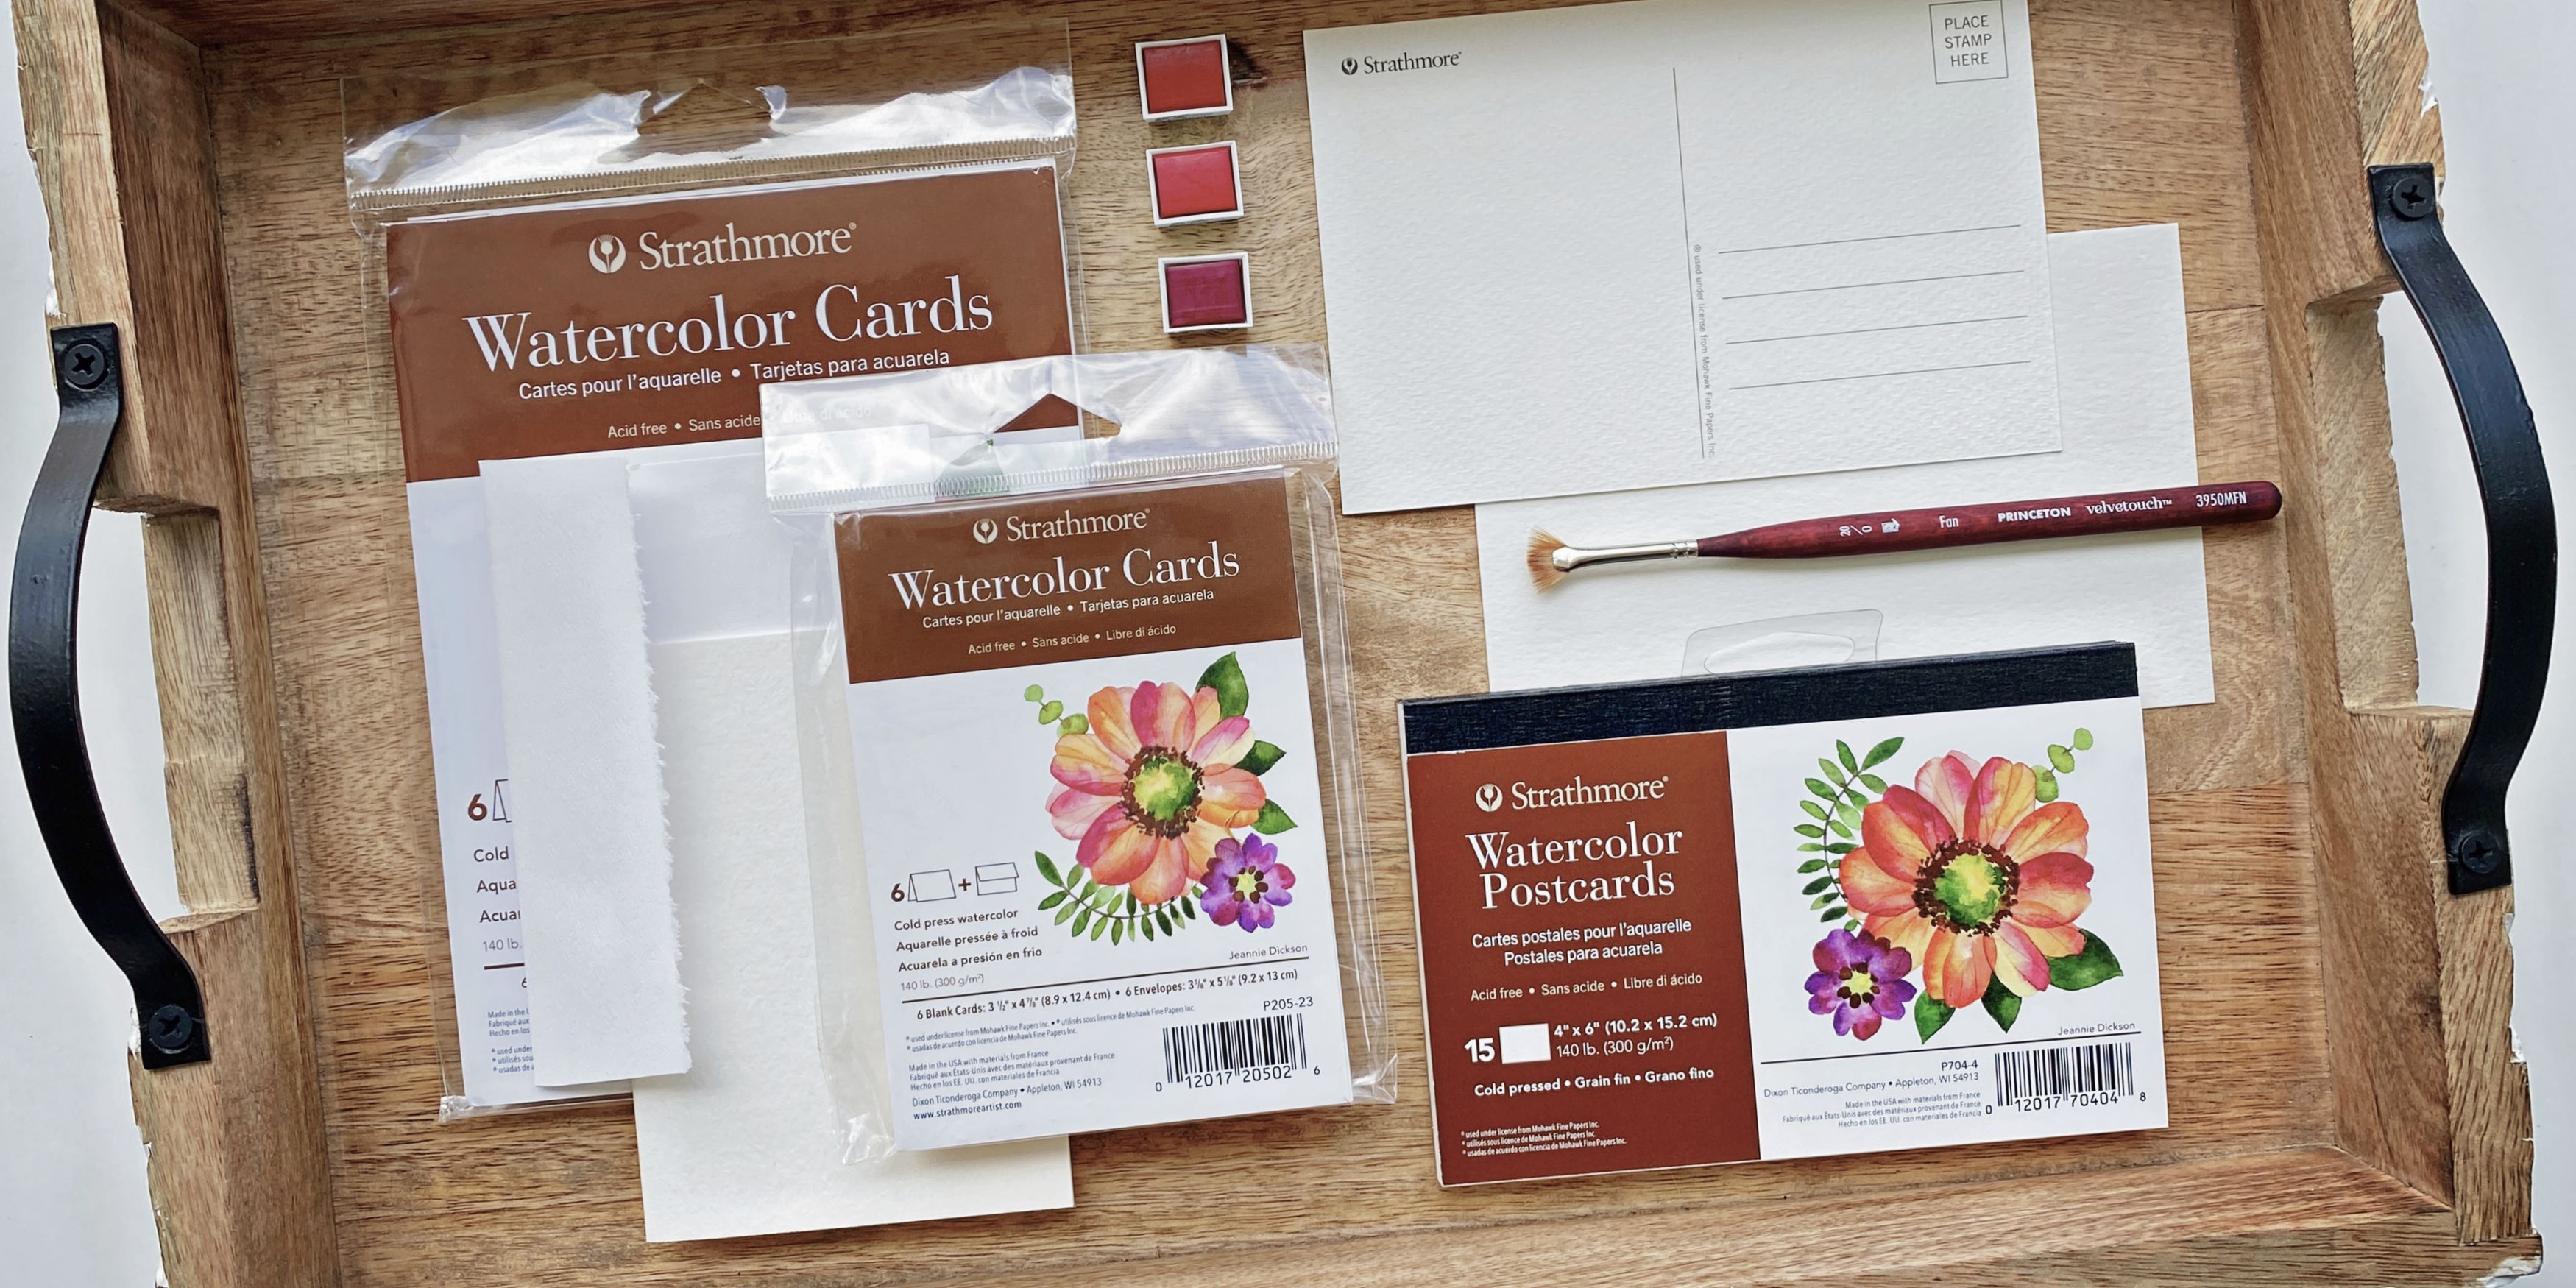 Watercolor Pads Get it now - The Stationers